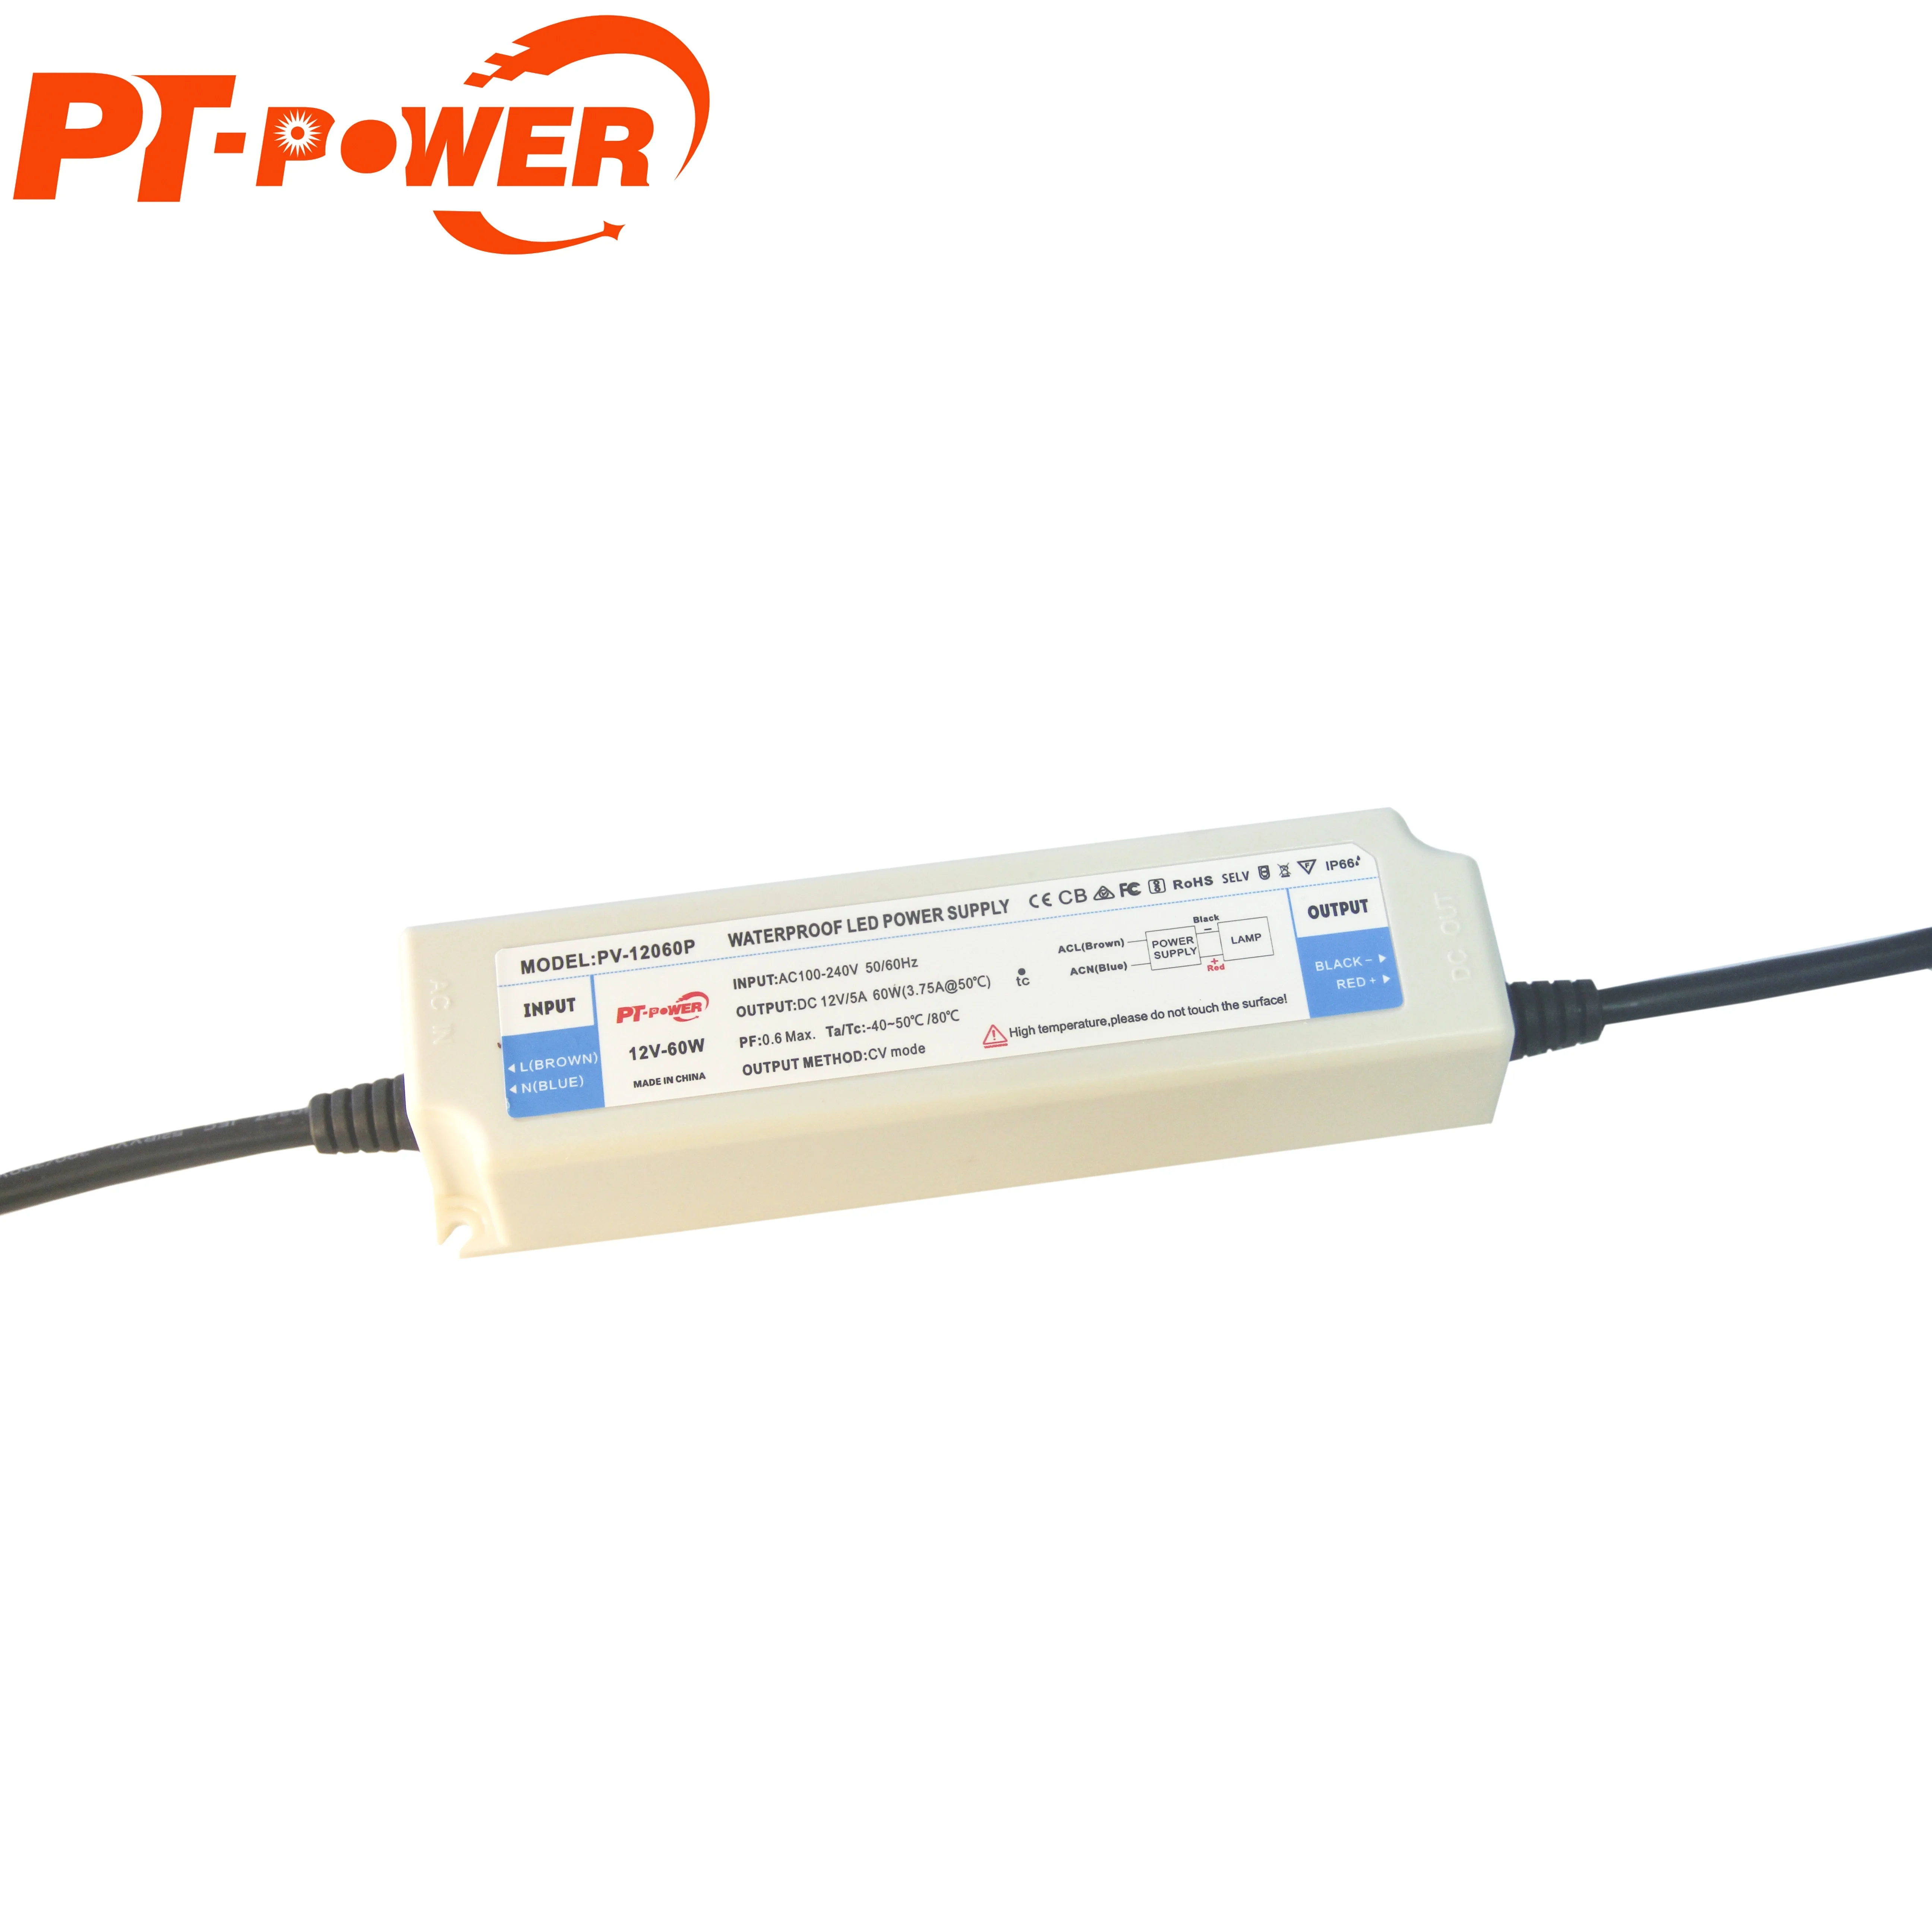 ultra thin led power supply switching mode power supply 24v 60w power transformer led lights driver